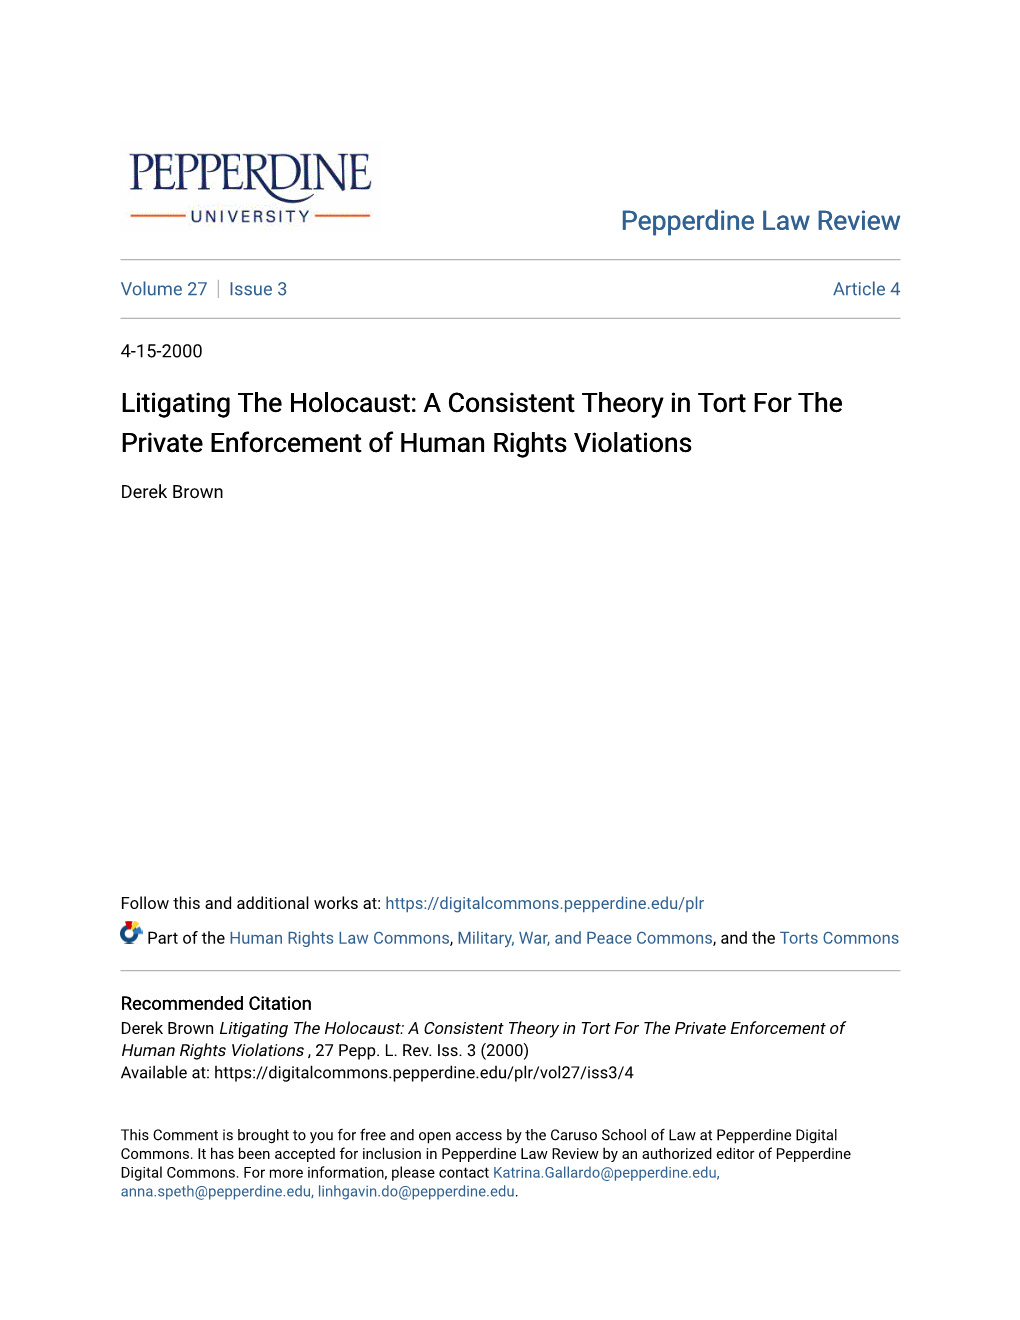 Litigating the Holocaust: a Consistent Theory in Tort for the Private Enforcement of Human Rights Violations